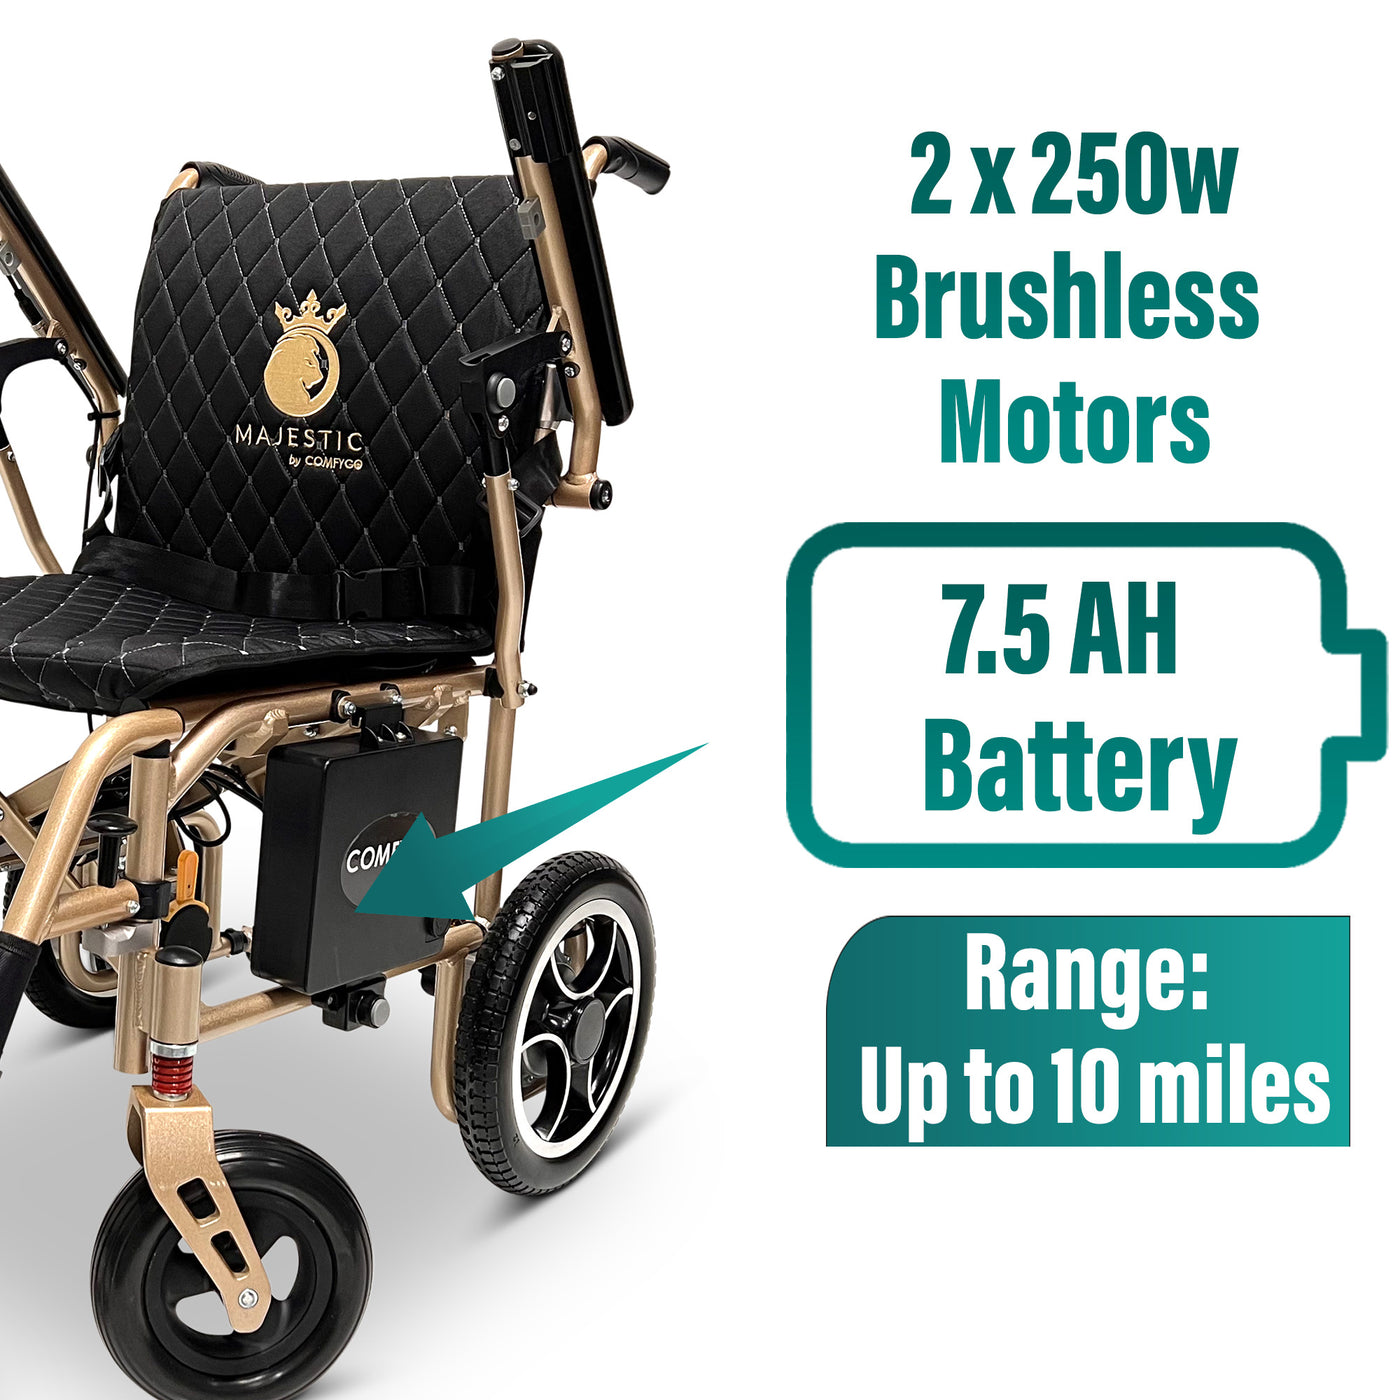 X7 Lightweight Foldable Electric Wheelchair 19 Miles